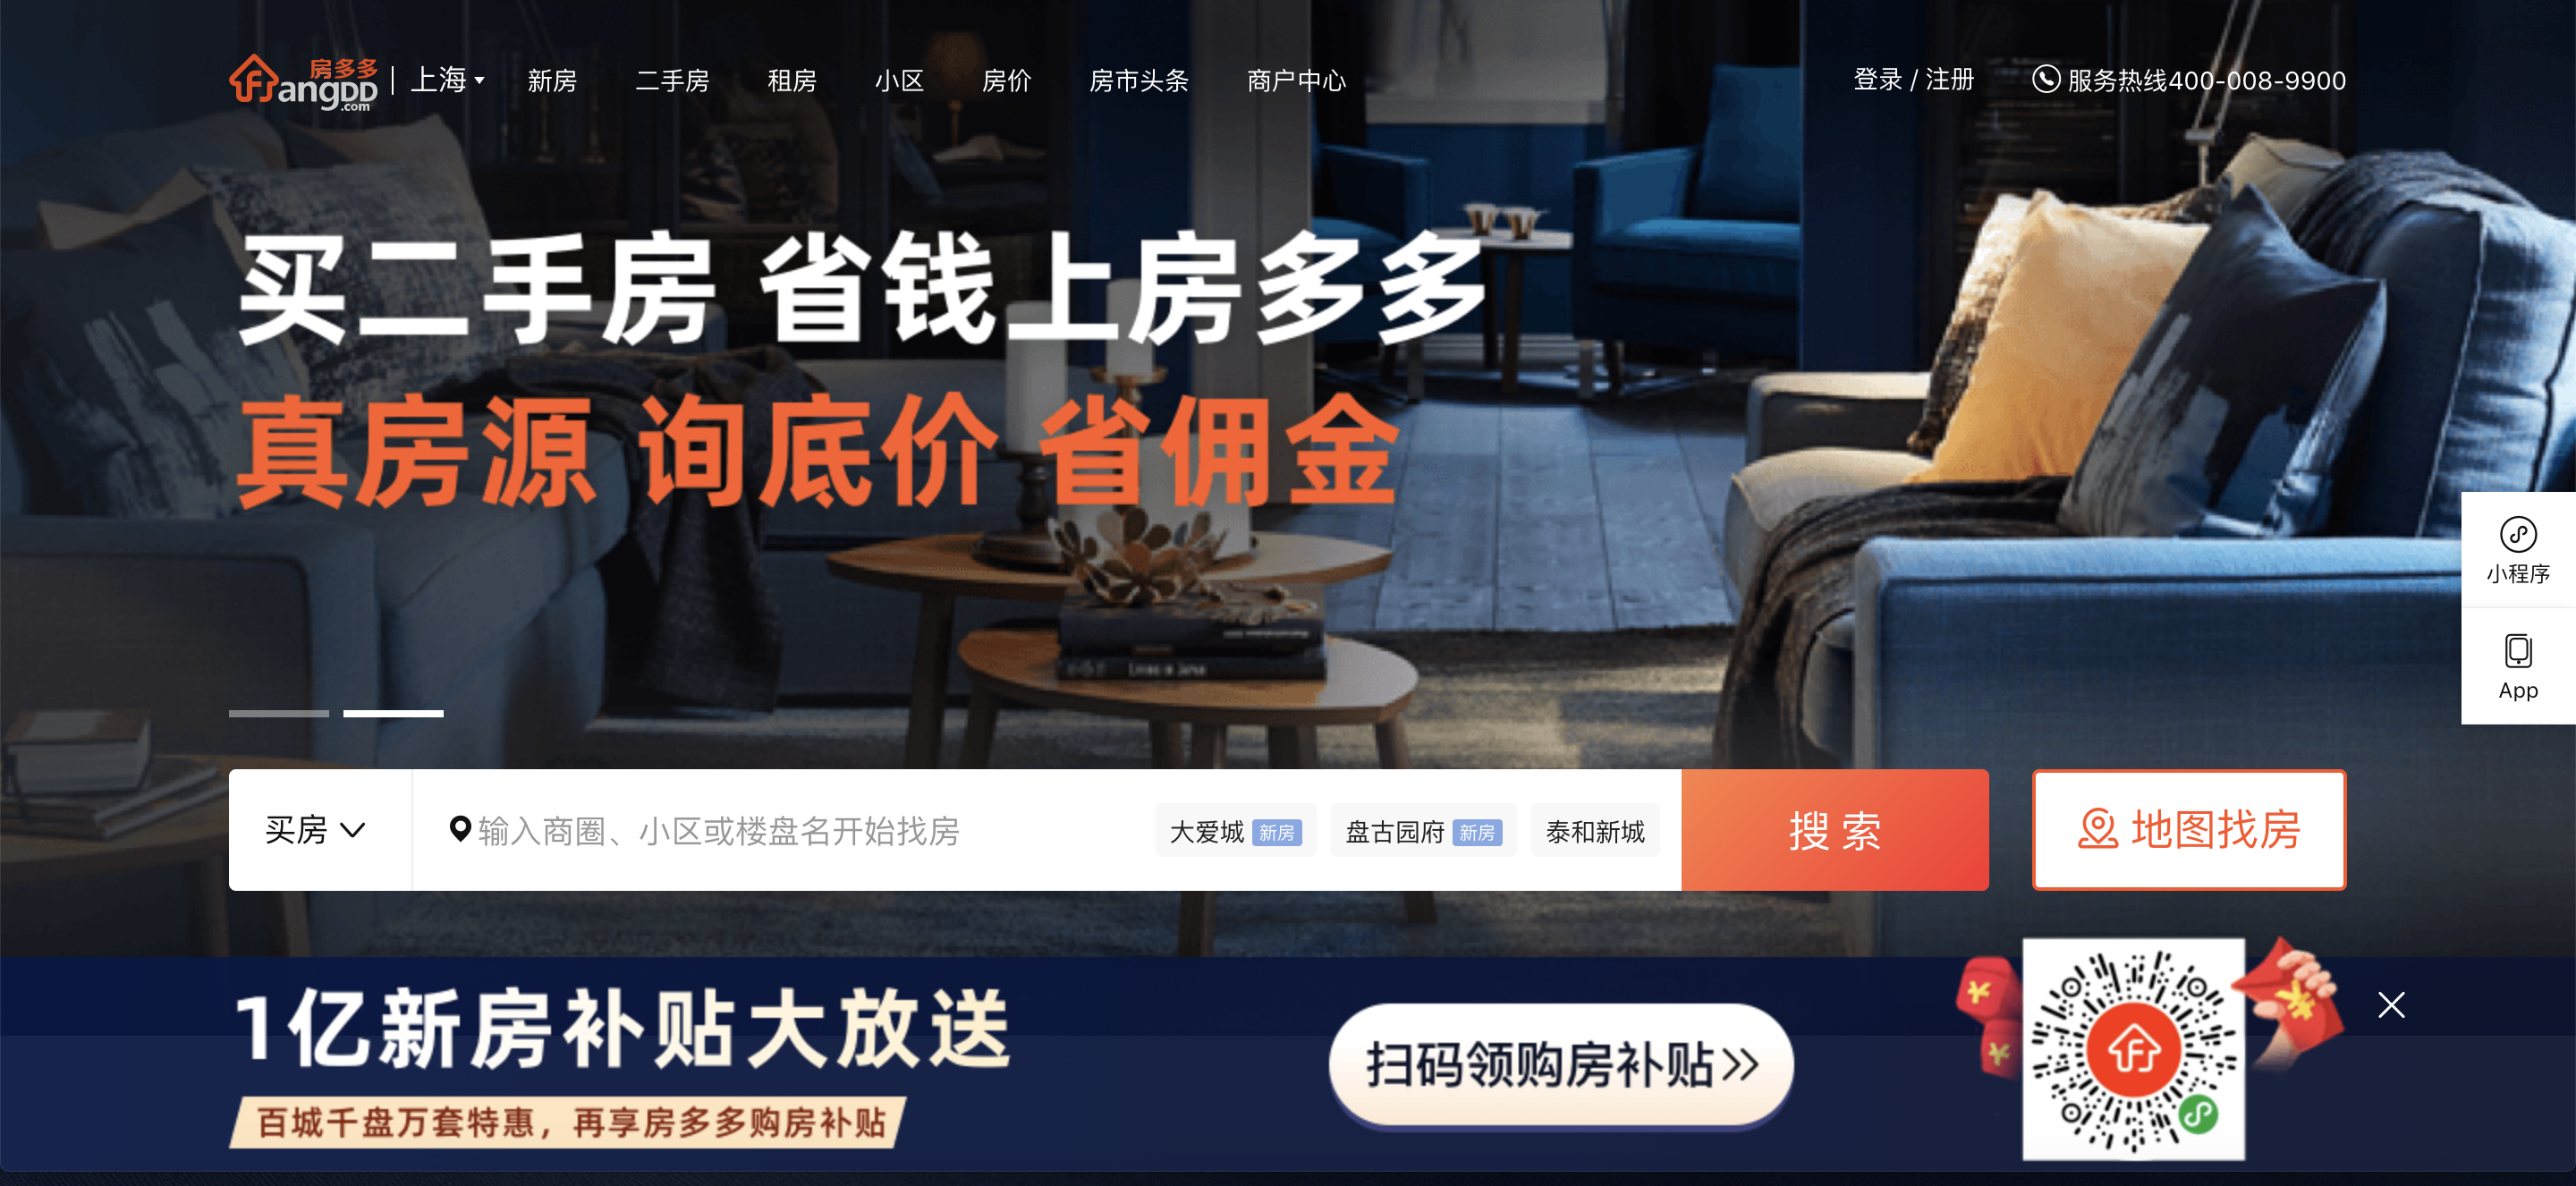 FangDD strong online real estate marketplace in China, raised $78 million in 2019 through an IPO on the NASDAQ